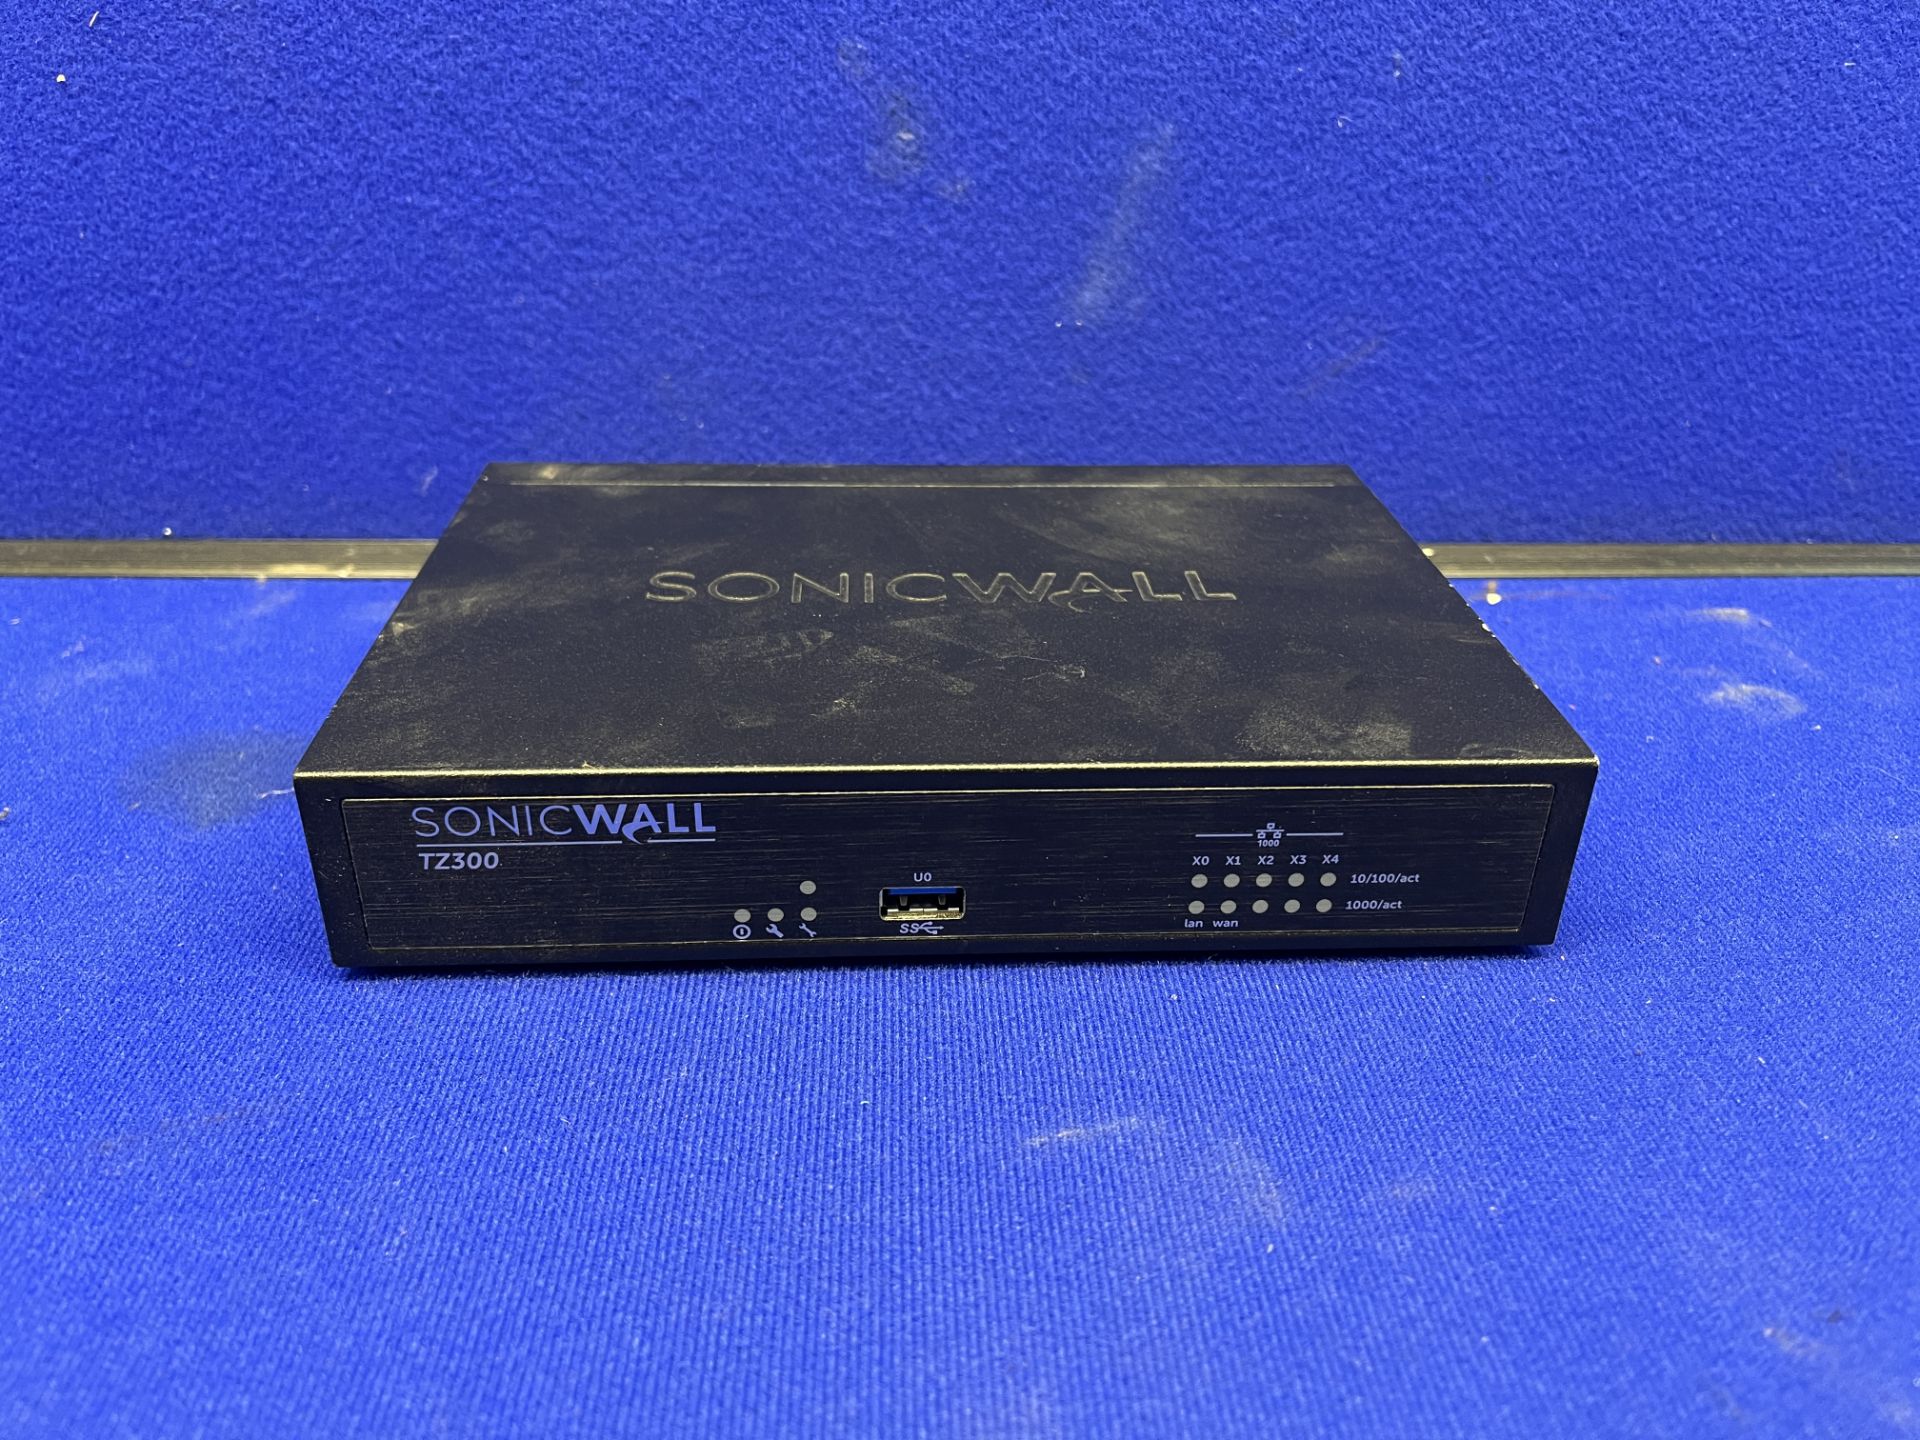 SONICWALL TZ300 Network Security Appliance